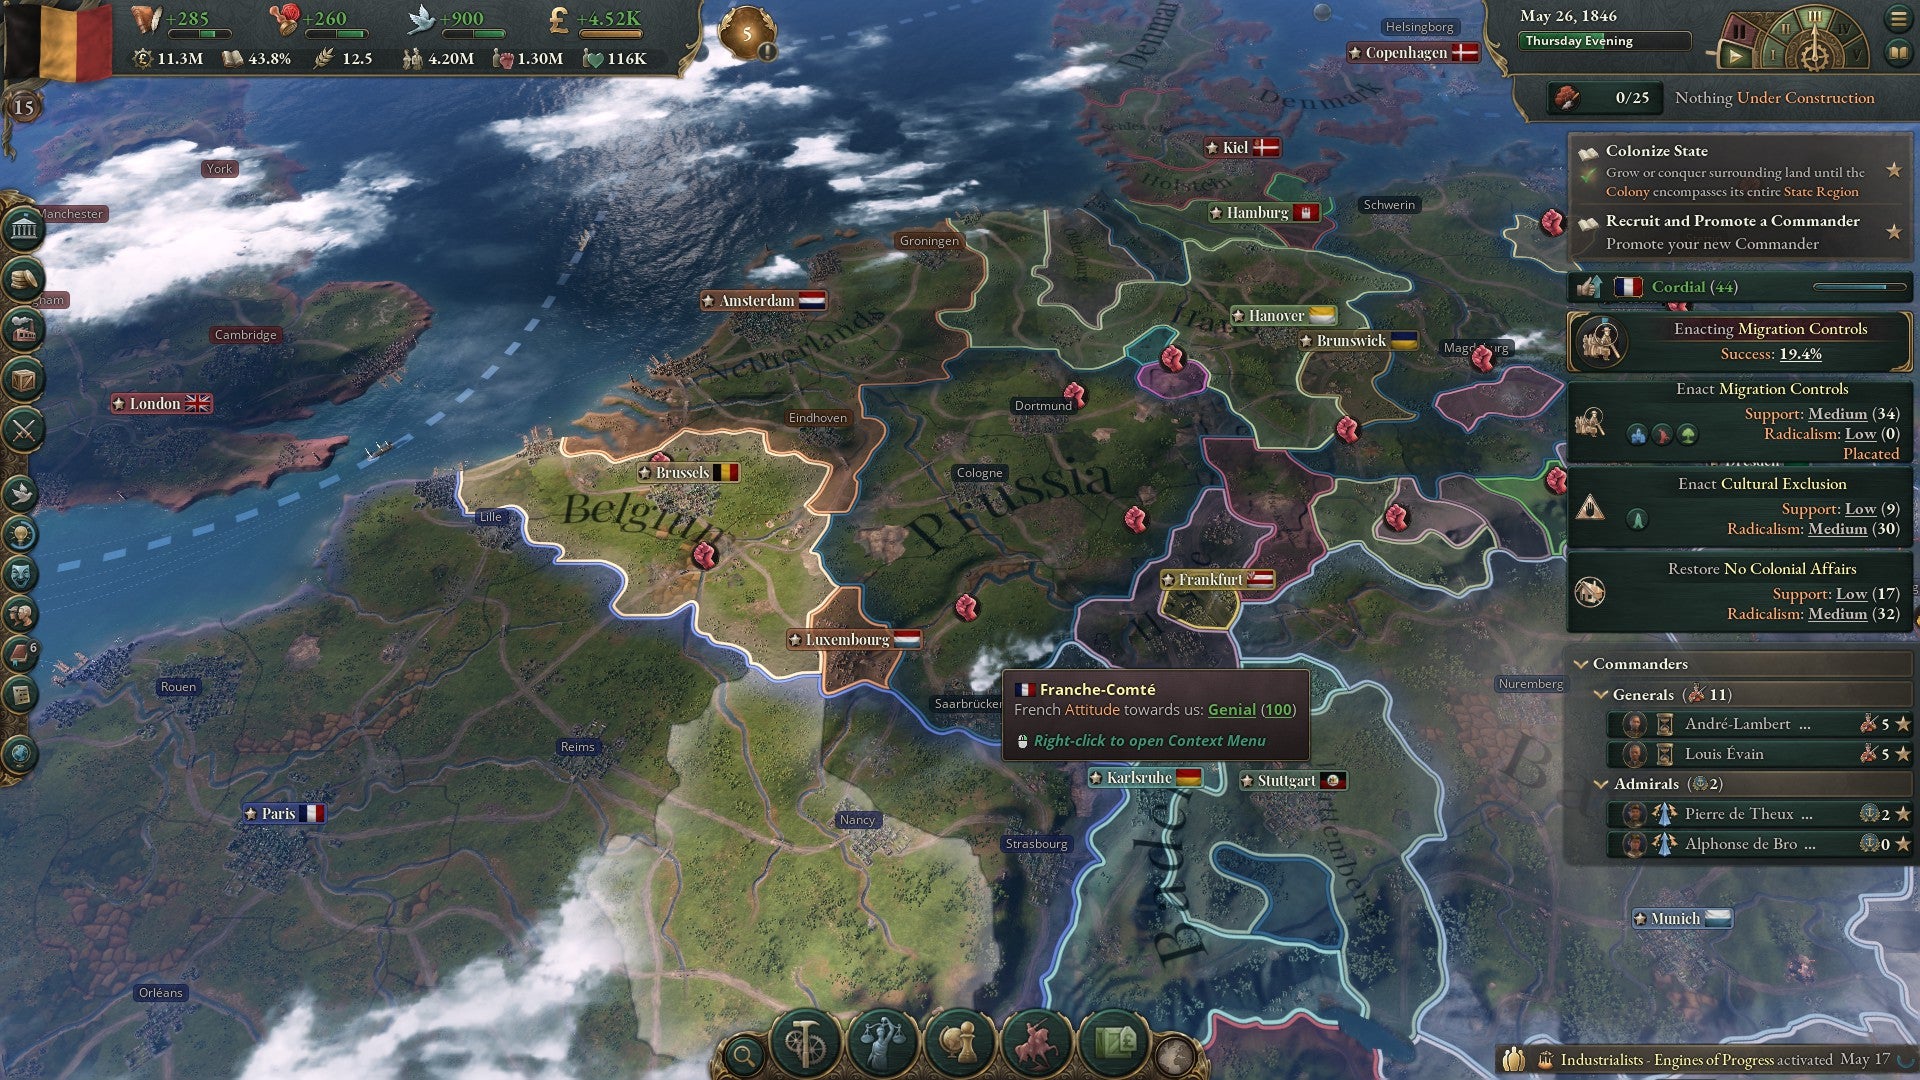 A screenshot from Victoria 3 showing a map of Europe with a gameplay interface displaying in-game data and activity